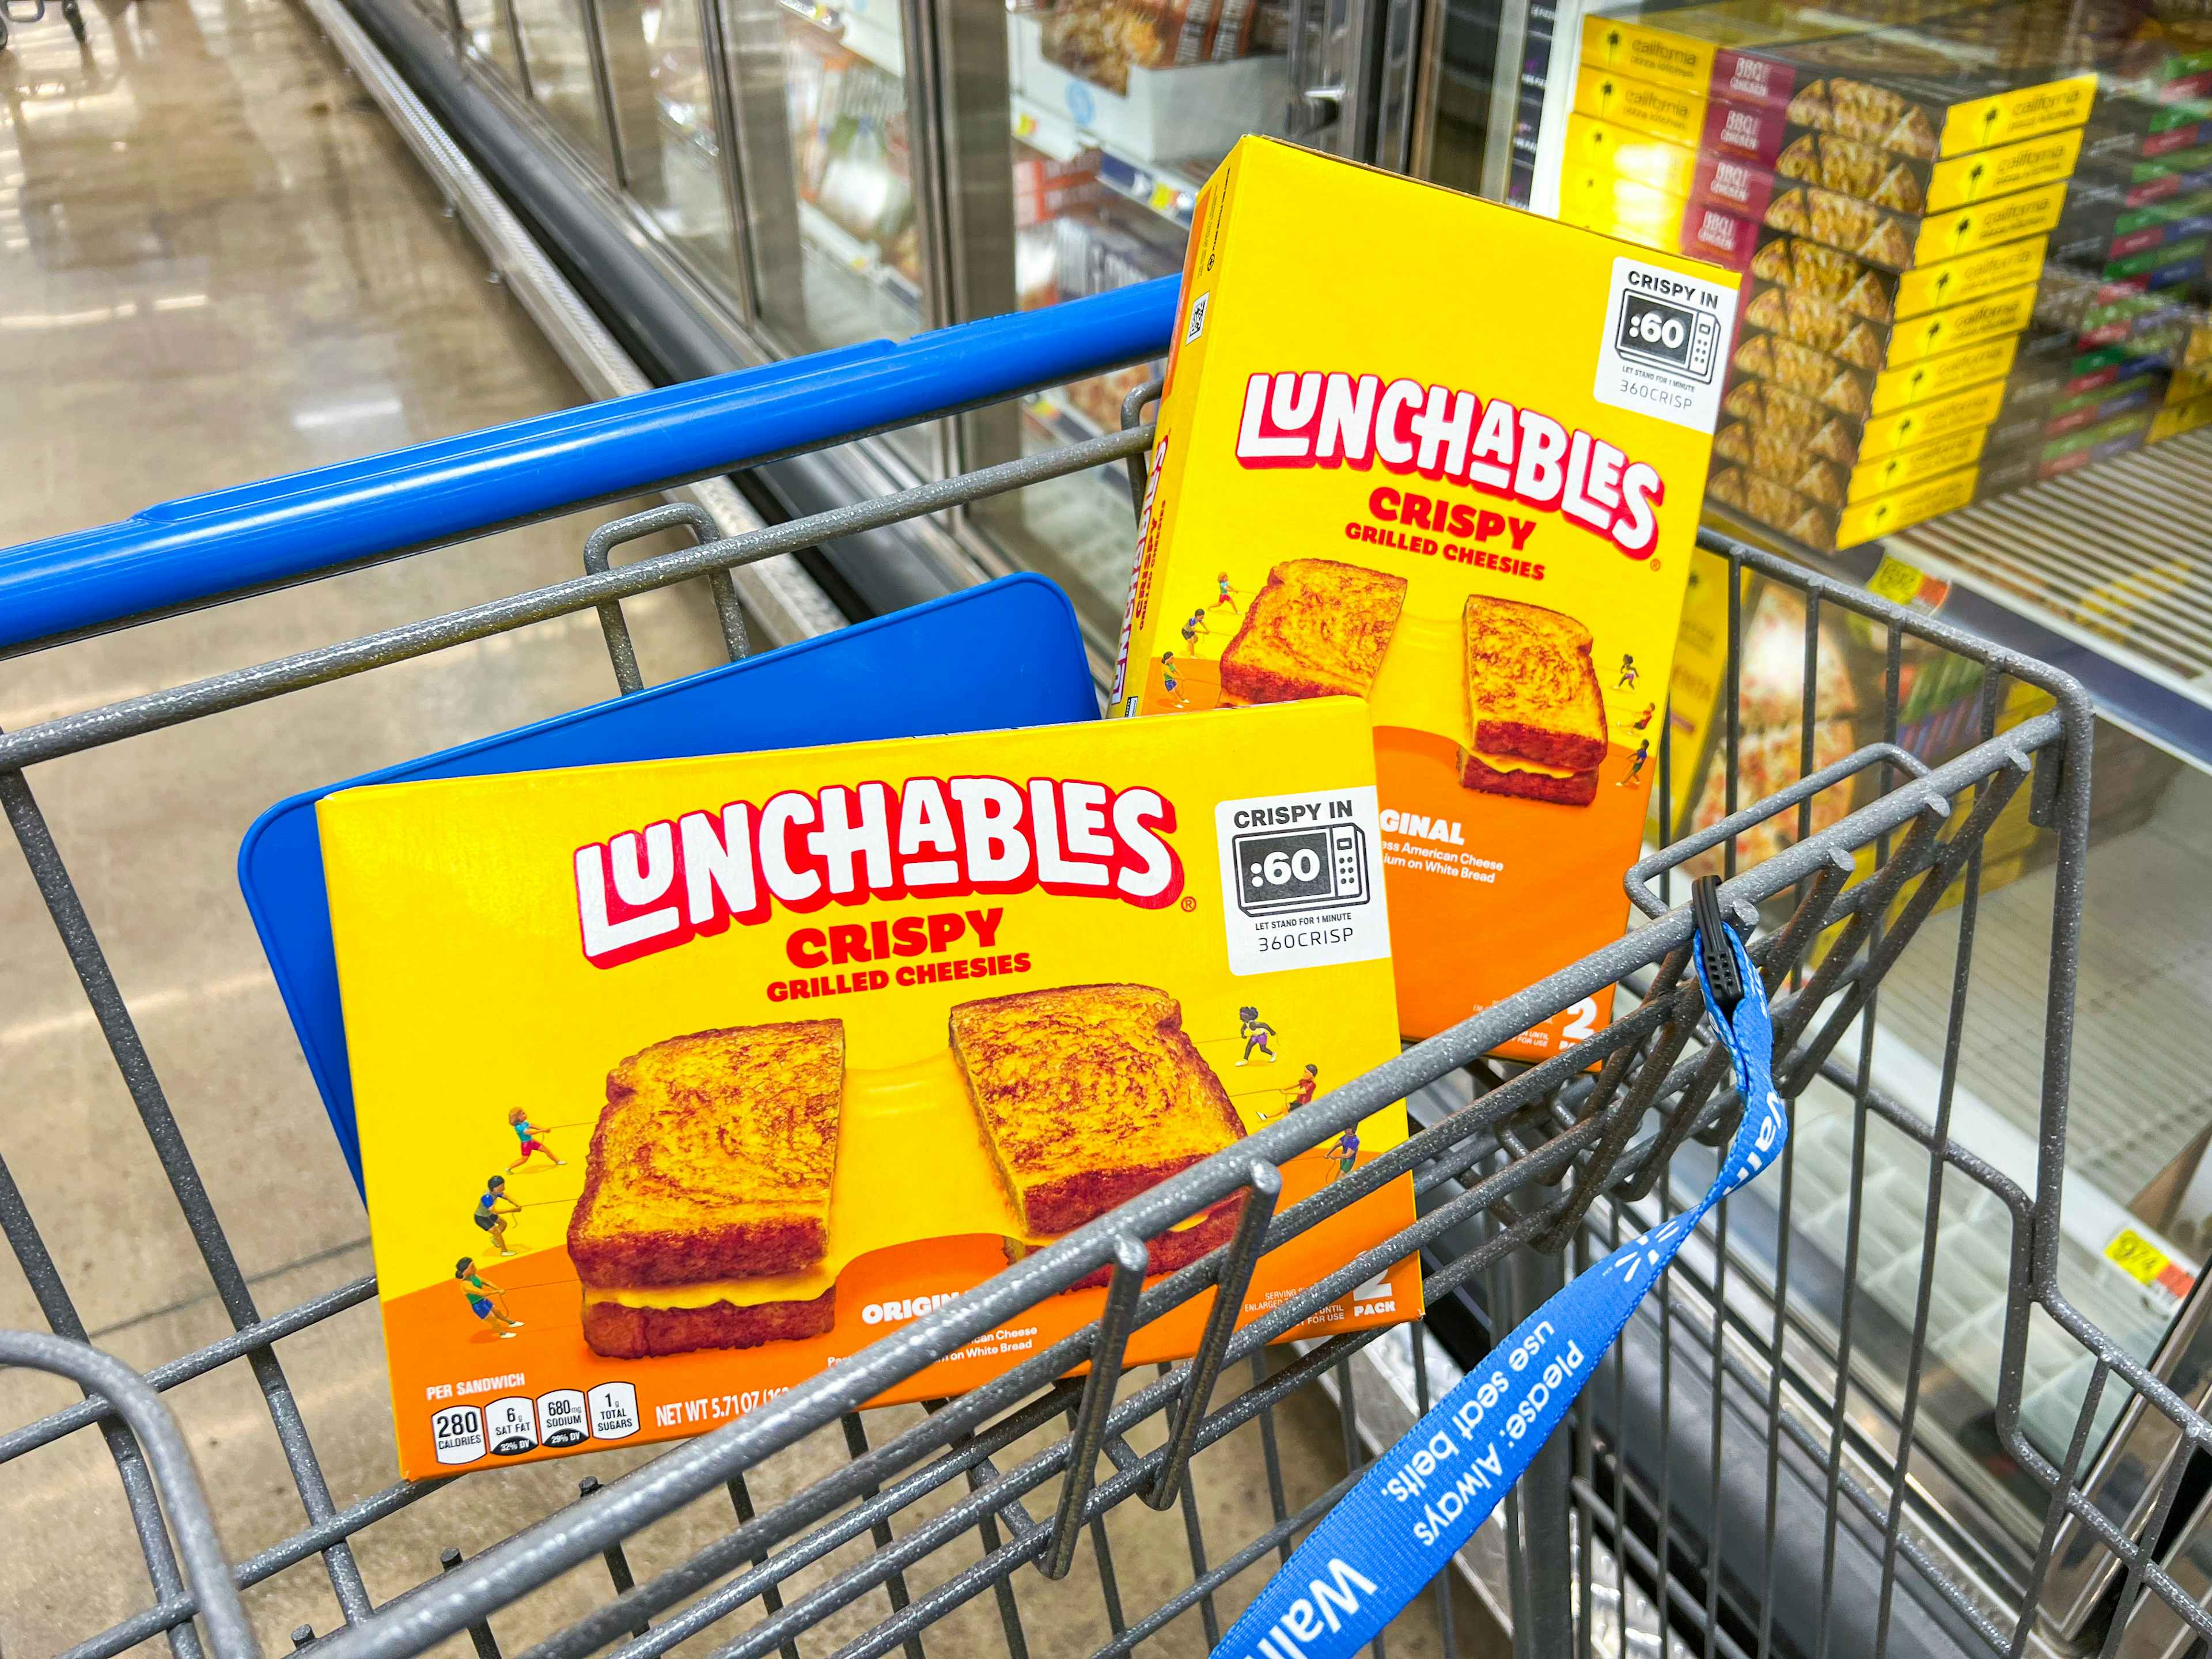 two boxes of lunchables grilled cheesies in walmart cart